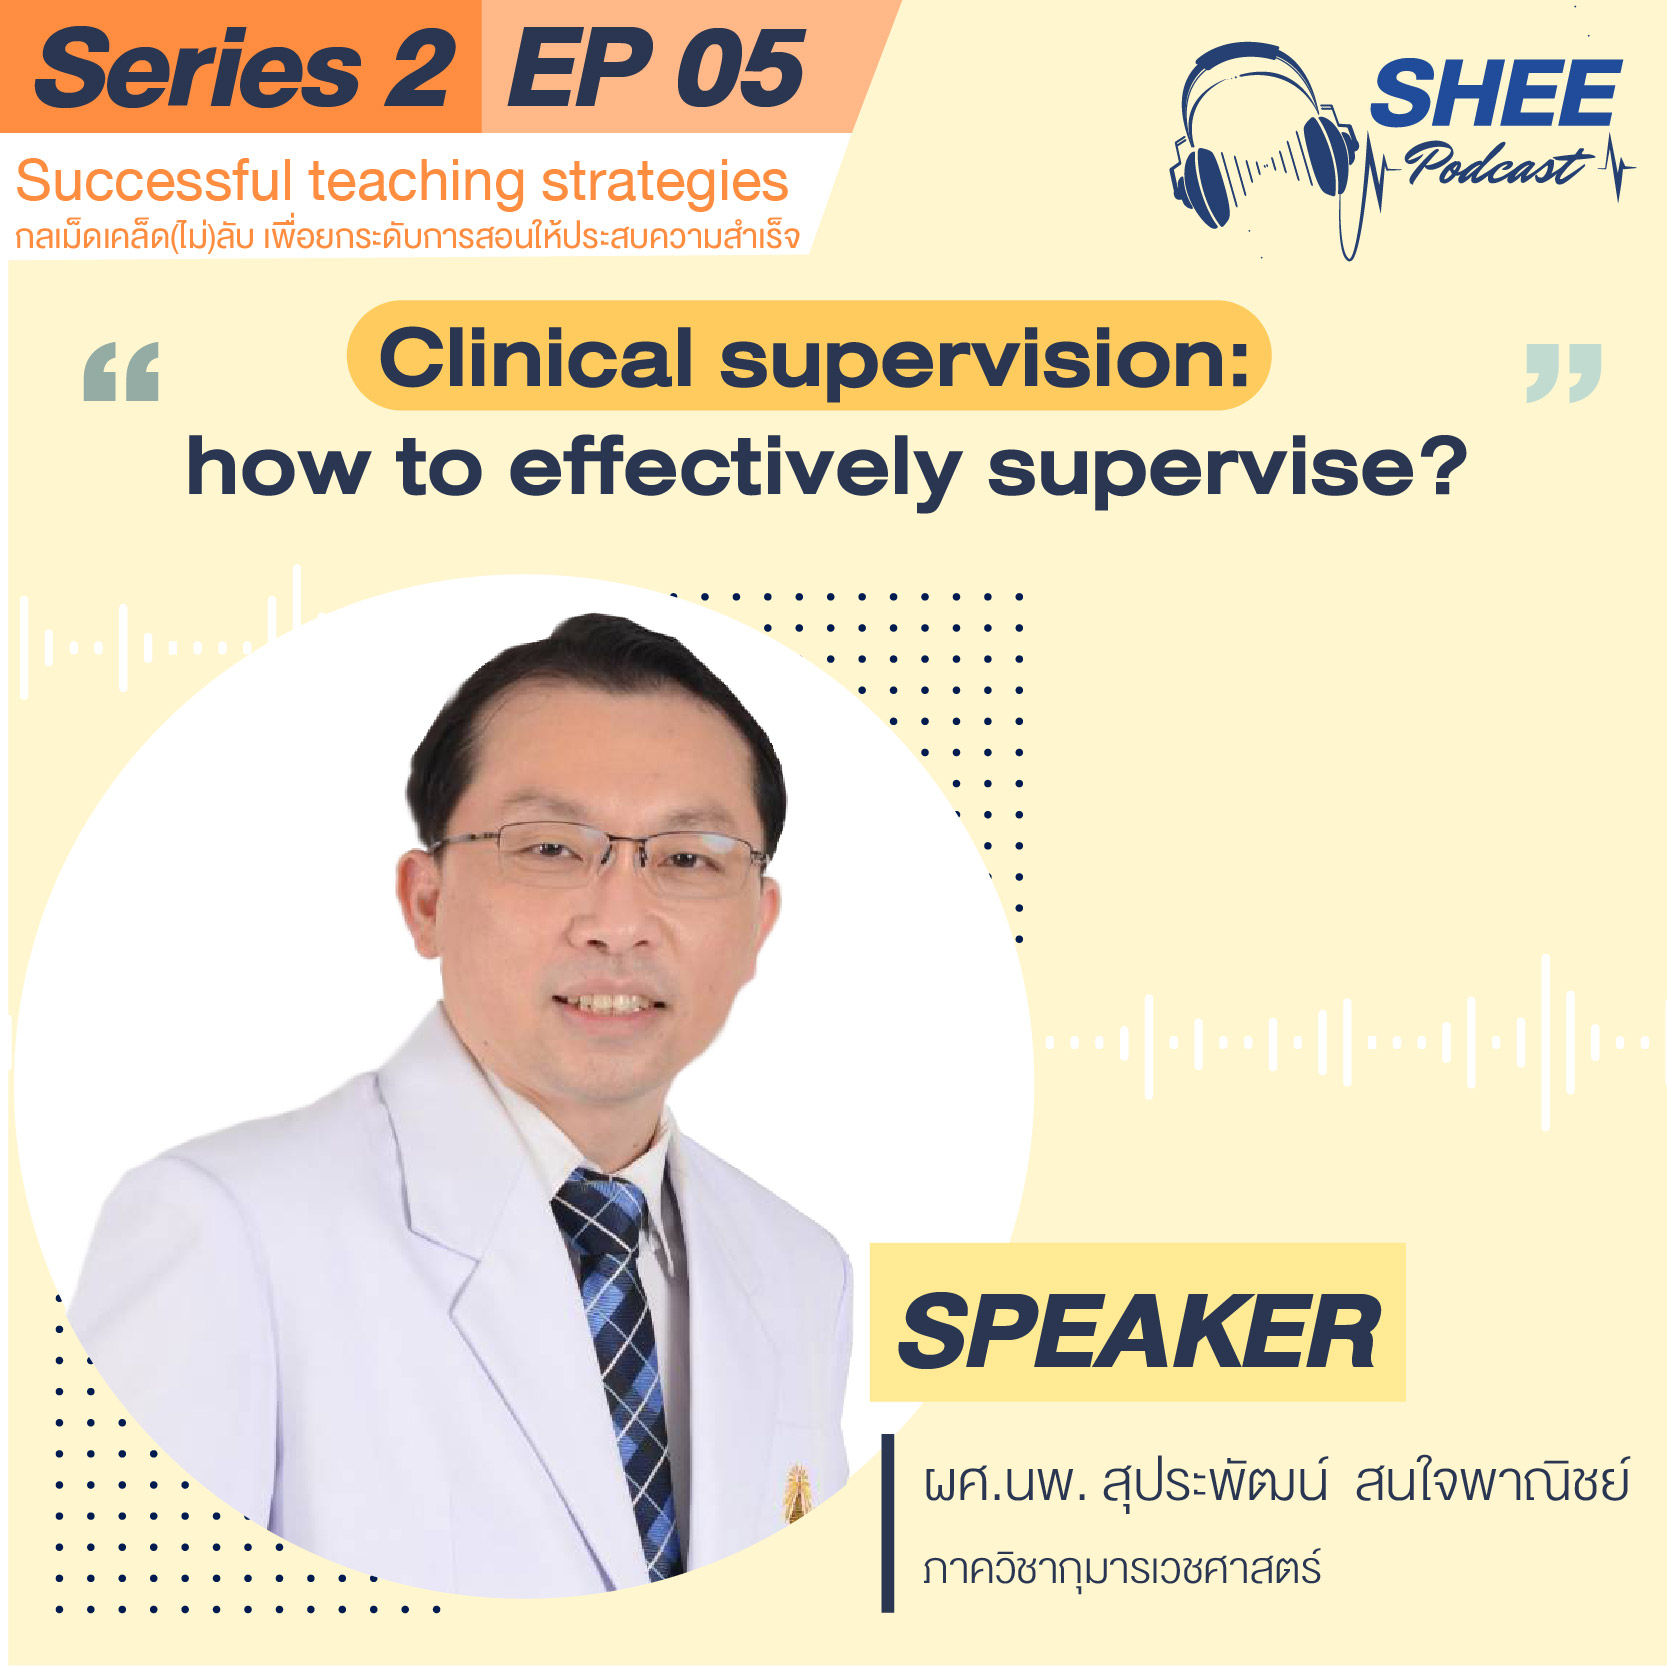 Episode 5: Clinical supervision: how to effectively supervise?